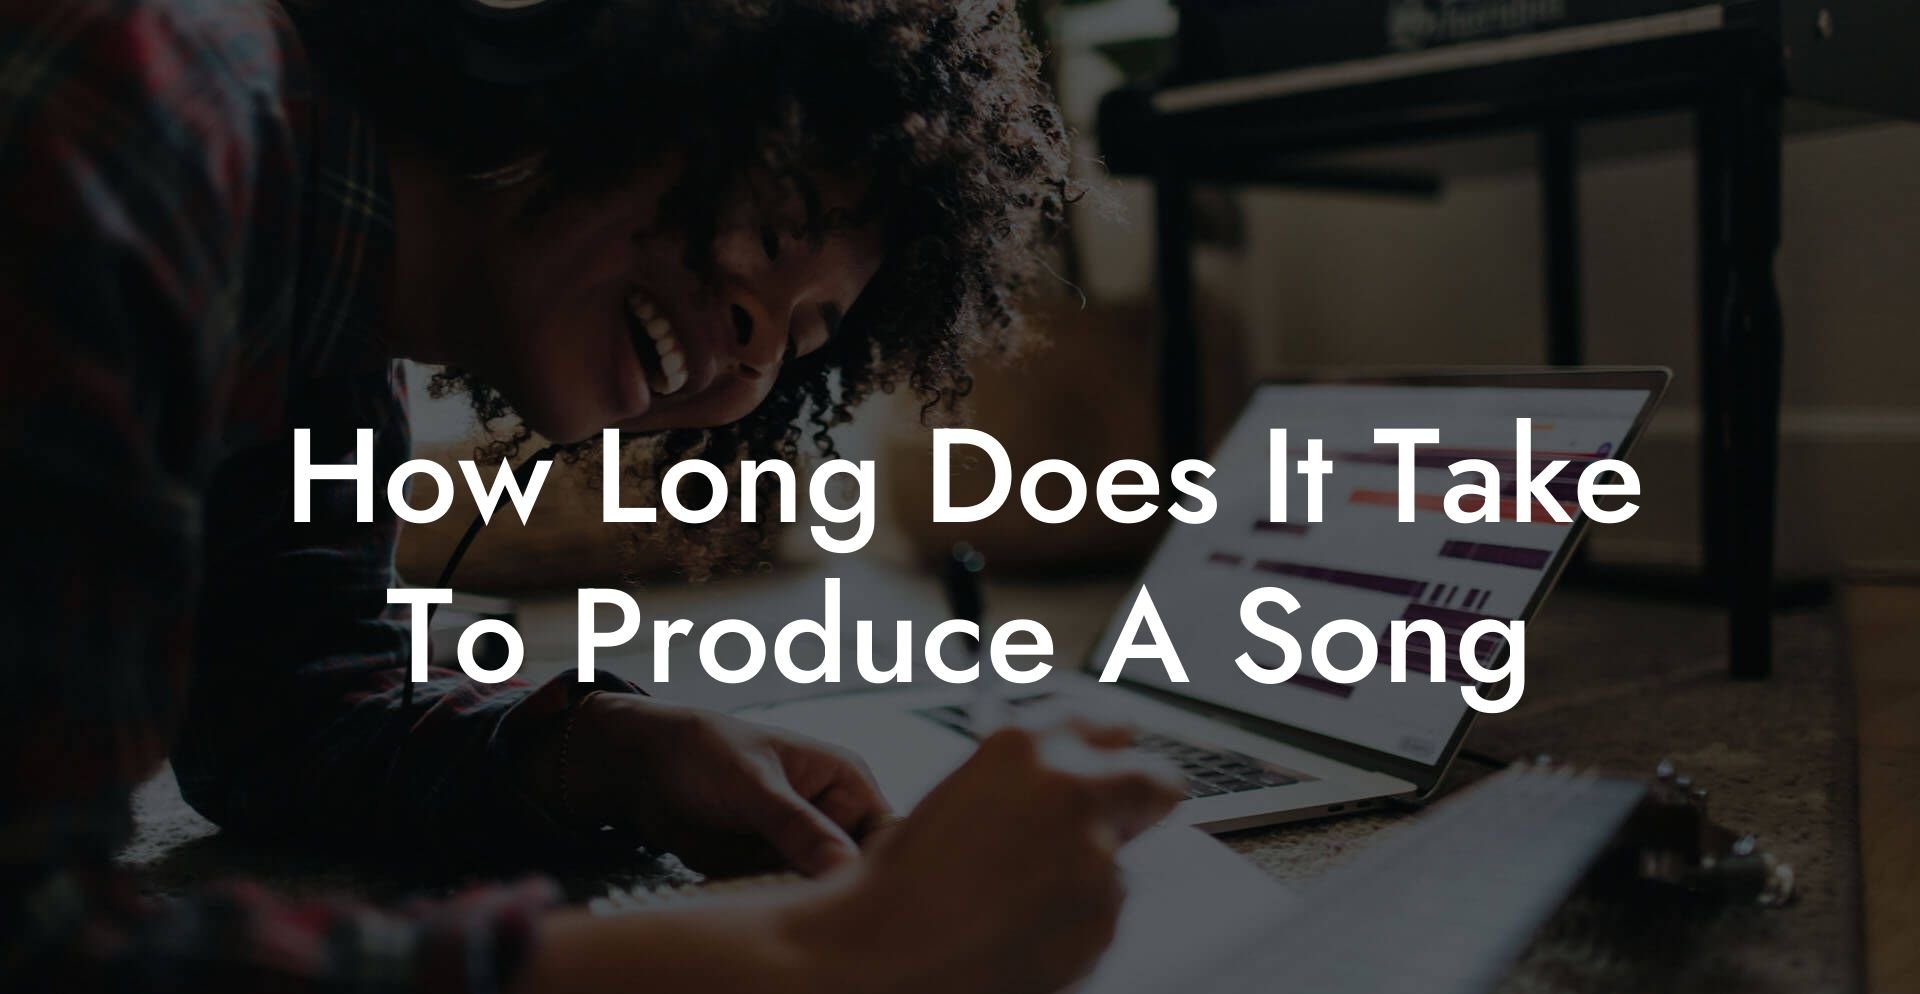 how long does it take to produce a song lyric assistant